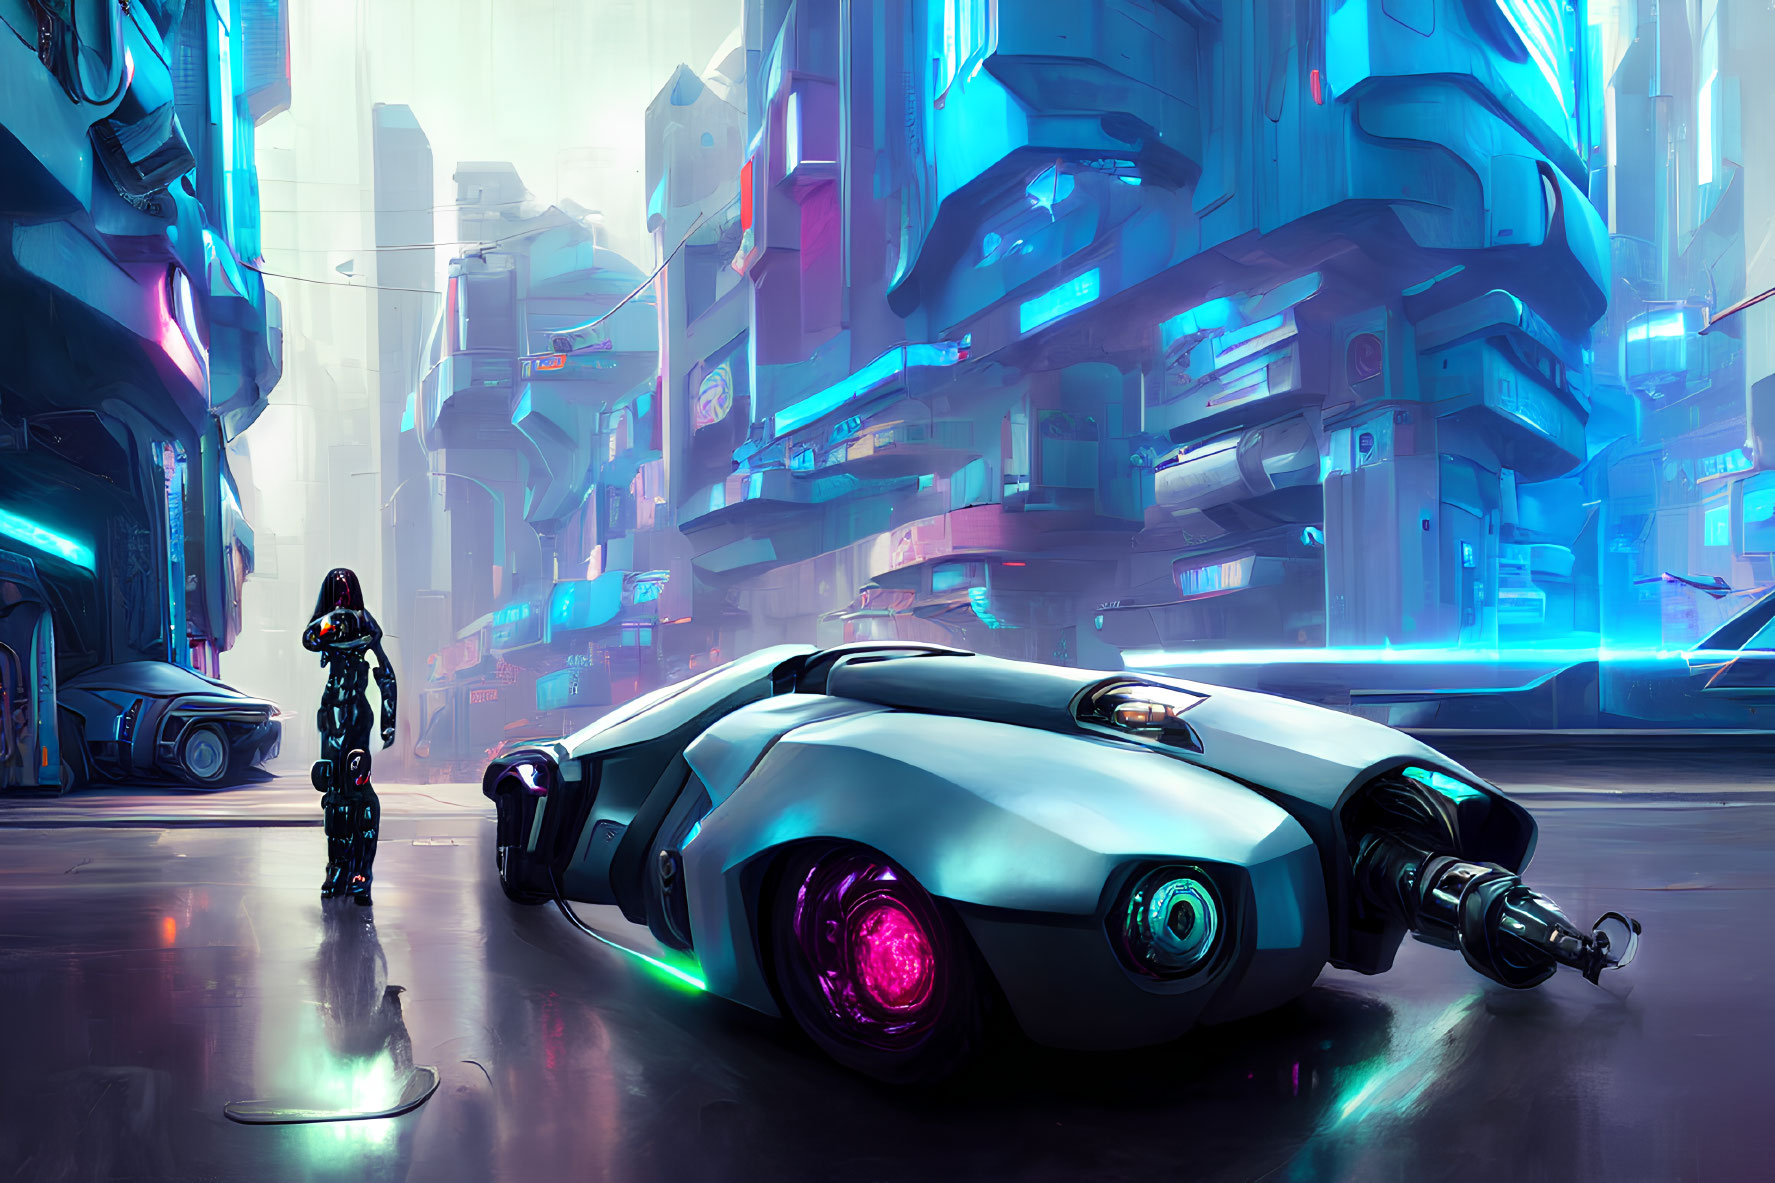 Futuristic cityscape with towering buildings, neon lights, person in a suit, and advanced car